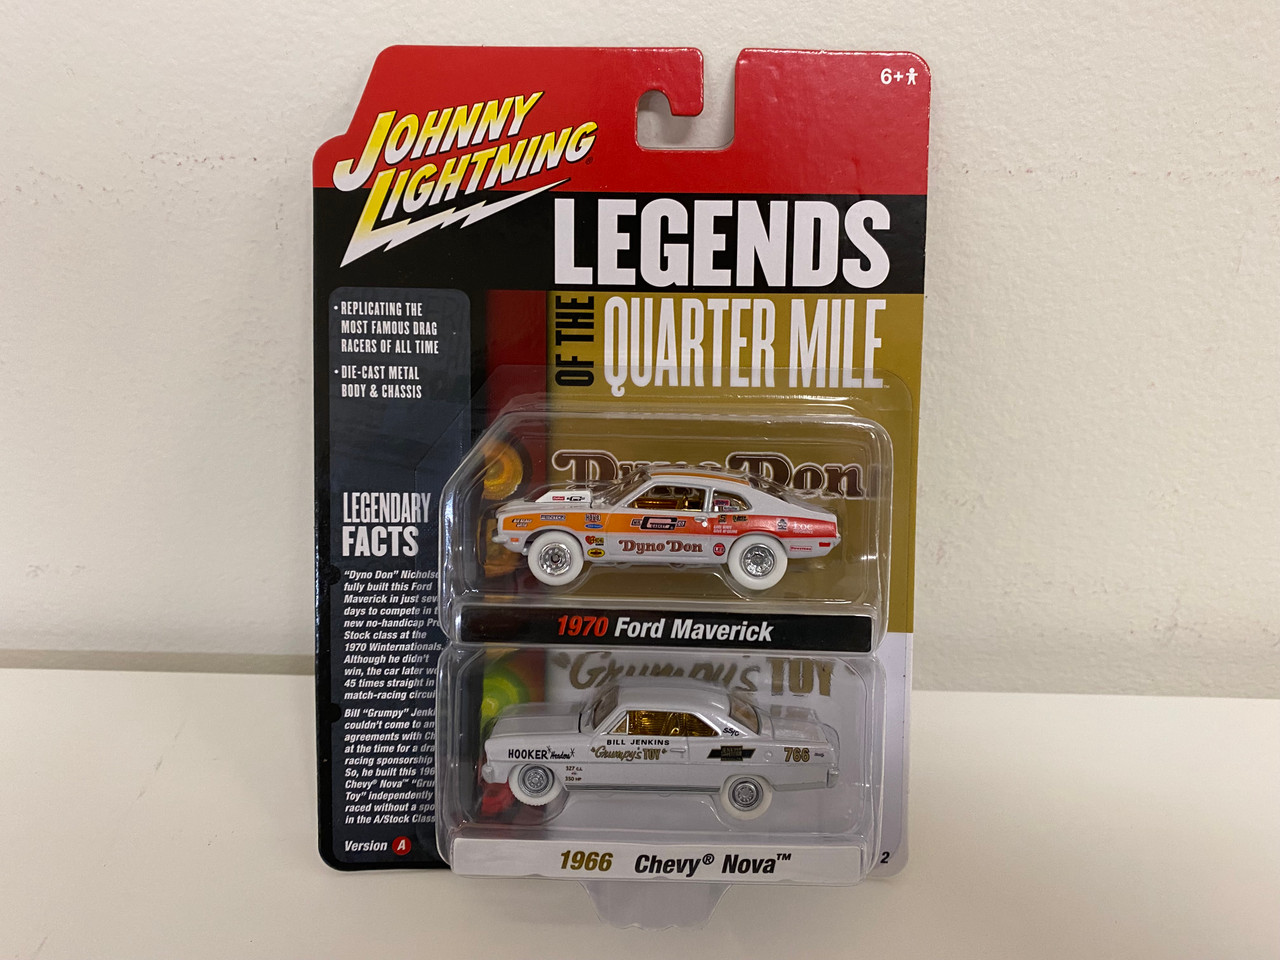 CHASE CARS WHITE LIGHTNING 1970 Ford Maverick Red Orange and White "Dyno" Don Nicholson and 1966 Chevrolet Nova White Bill "Grumpy" Jenkins "Legends of the Quarter Mile" Series Set of 2 Cars 1/64 Diecast Model Cars by Johnny Lightning